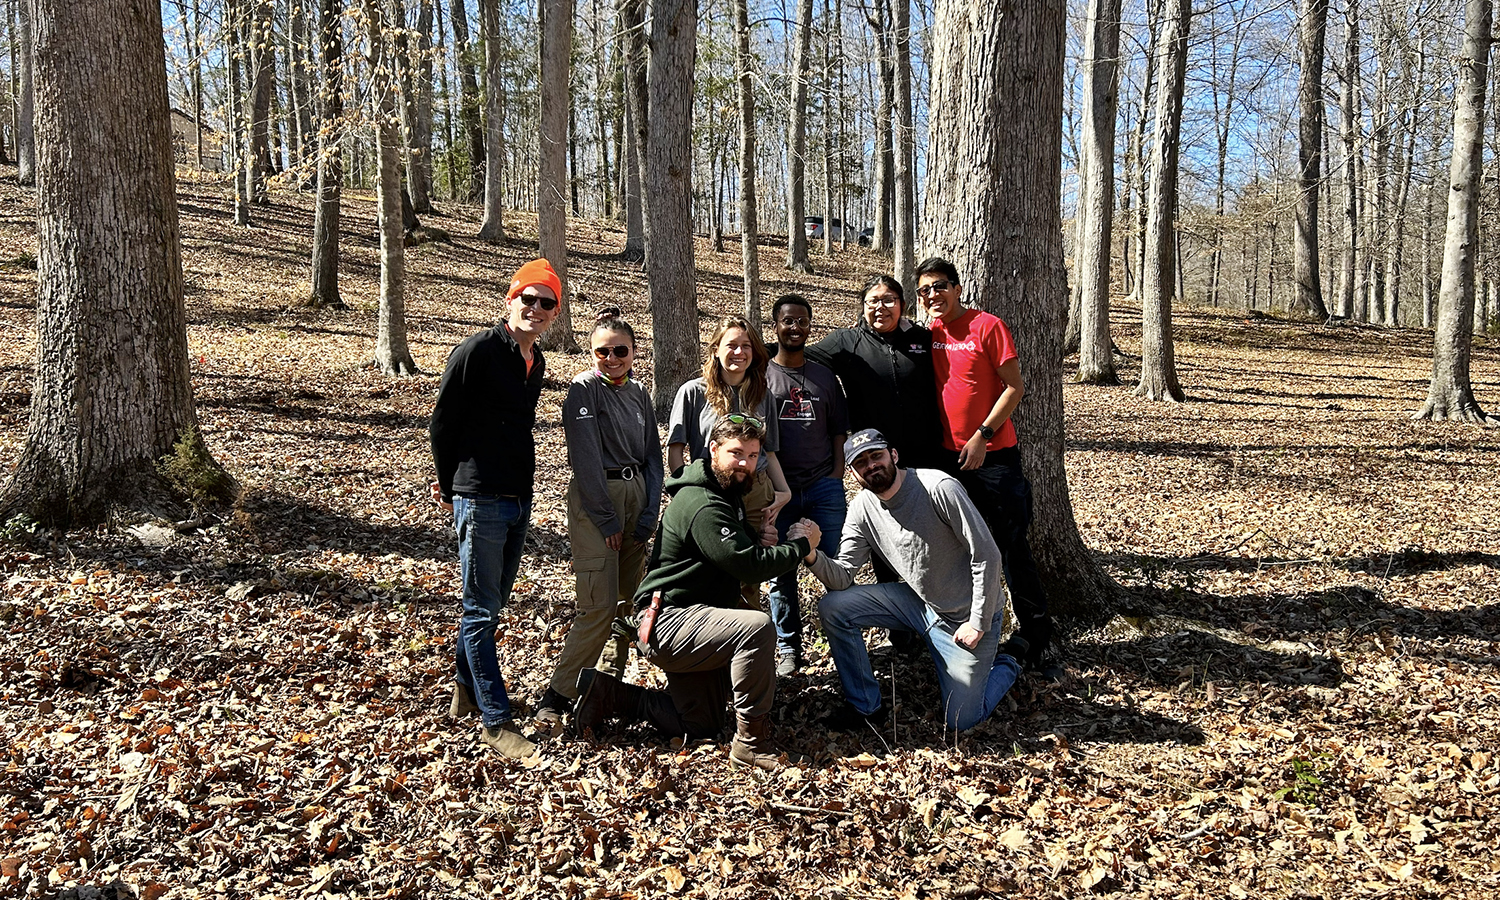 Assistant Director of the Center for Community Engagement and Service Learning Peter Budmen '15 (left) joins with students during an Alternative Spring Break experience at Pocahontas State Park in Virginia.